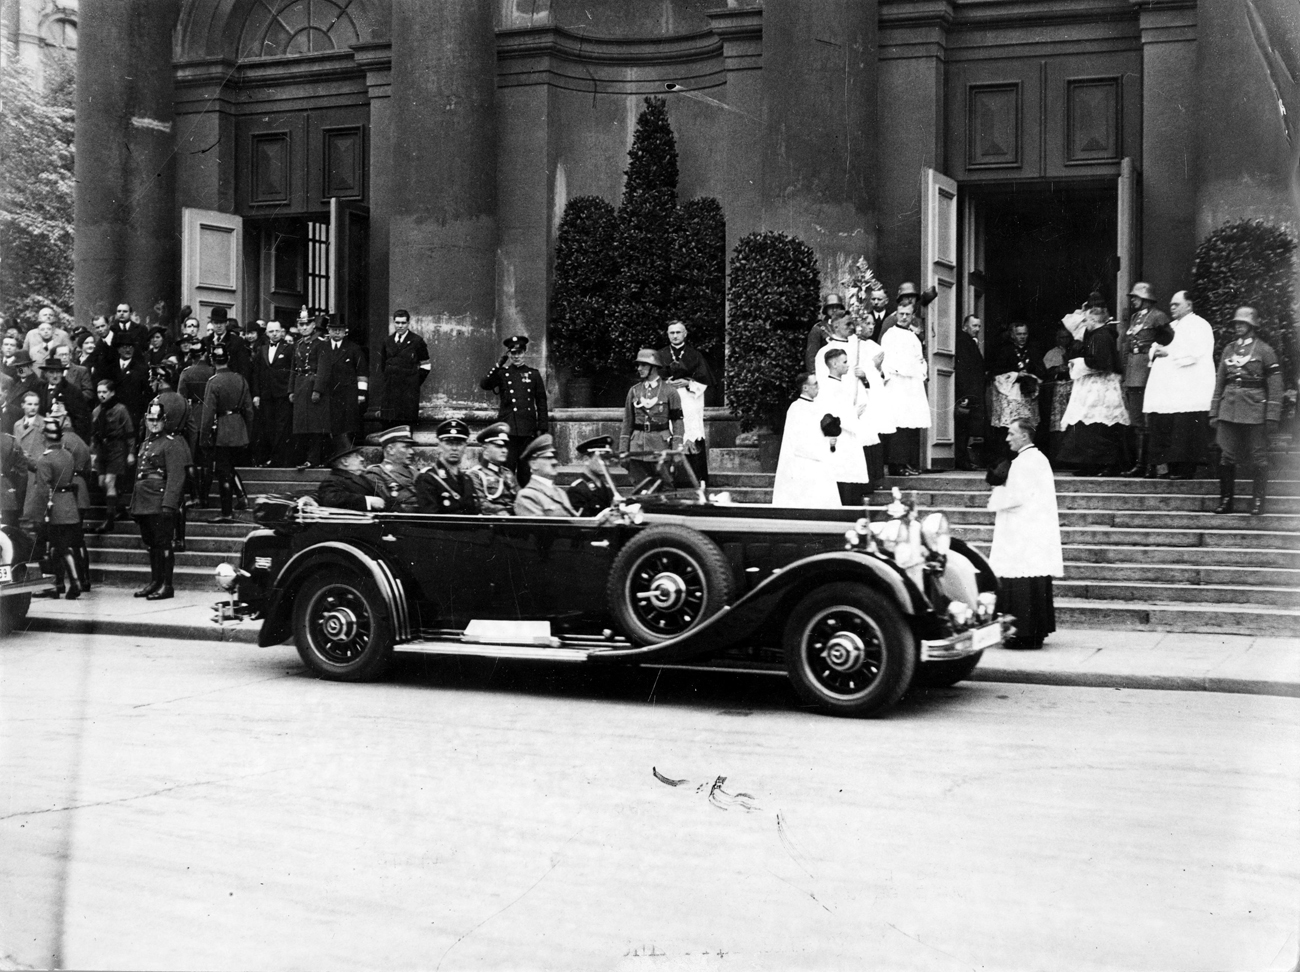 Adolf Hitler in his car leaves Saint Jadwiga church in Berlin after the memorial service for Polish First Marshal Jozef Pilsudski